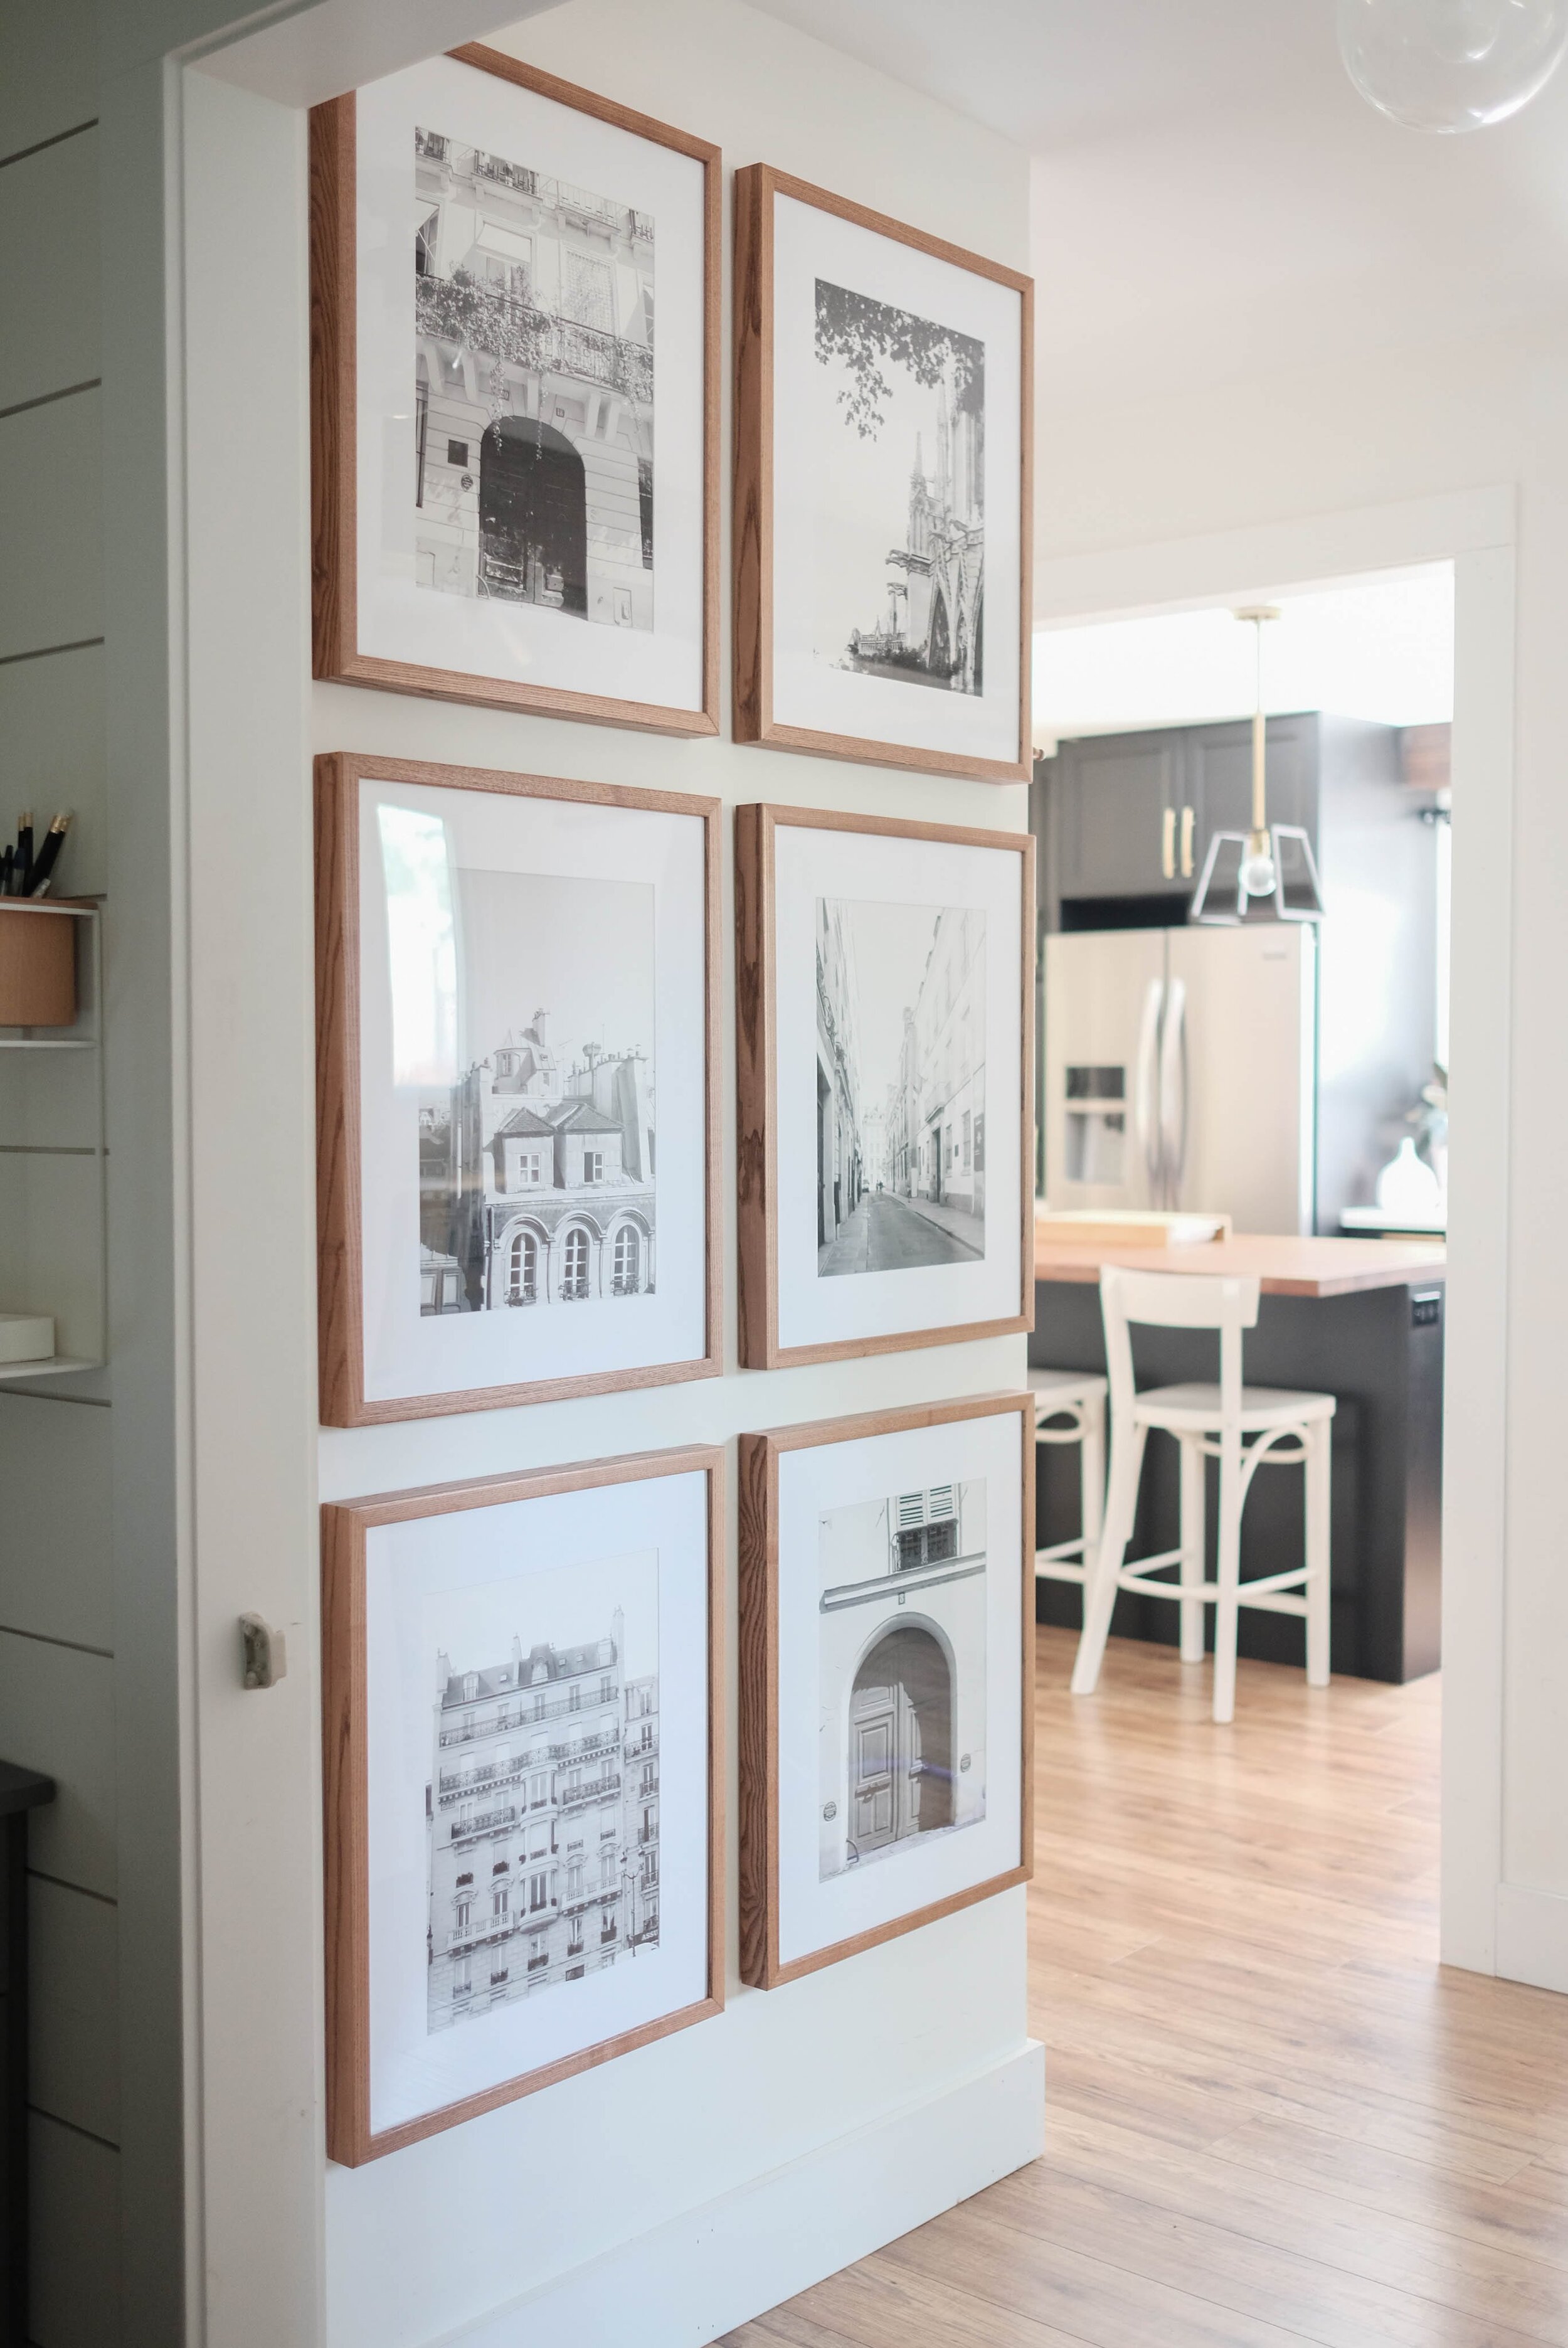 How To Make A Giant Hallway Frame Gallery